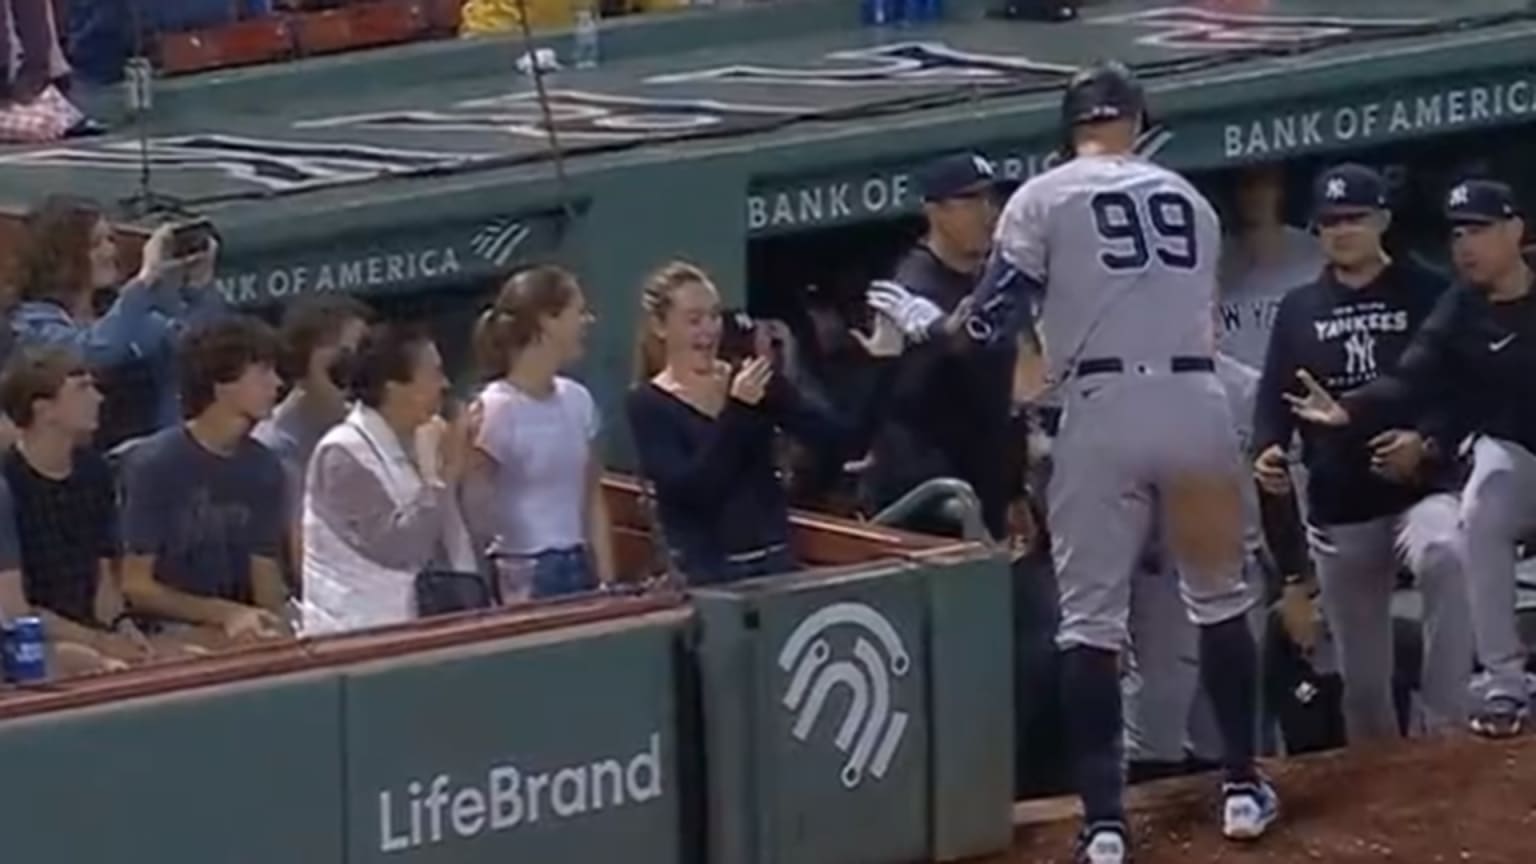 Aaron Judge high-fives a female fan who's recording on her phone as he reaches the dugout